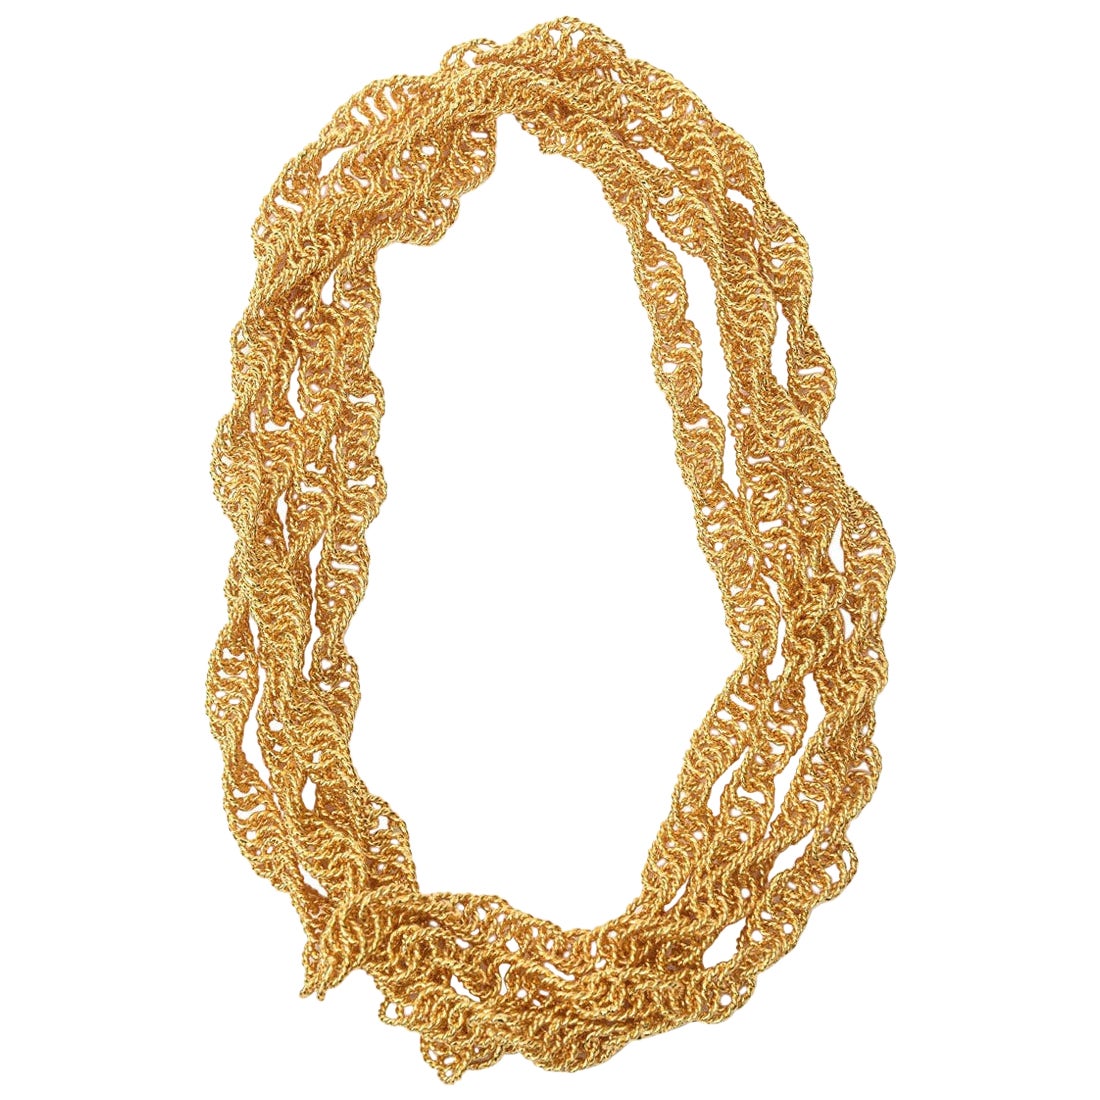 Vintage Gold Plated Spiral Chain Wrap Necklace 